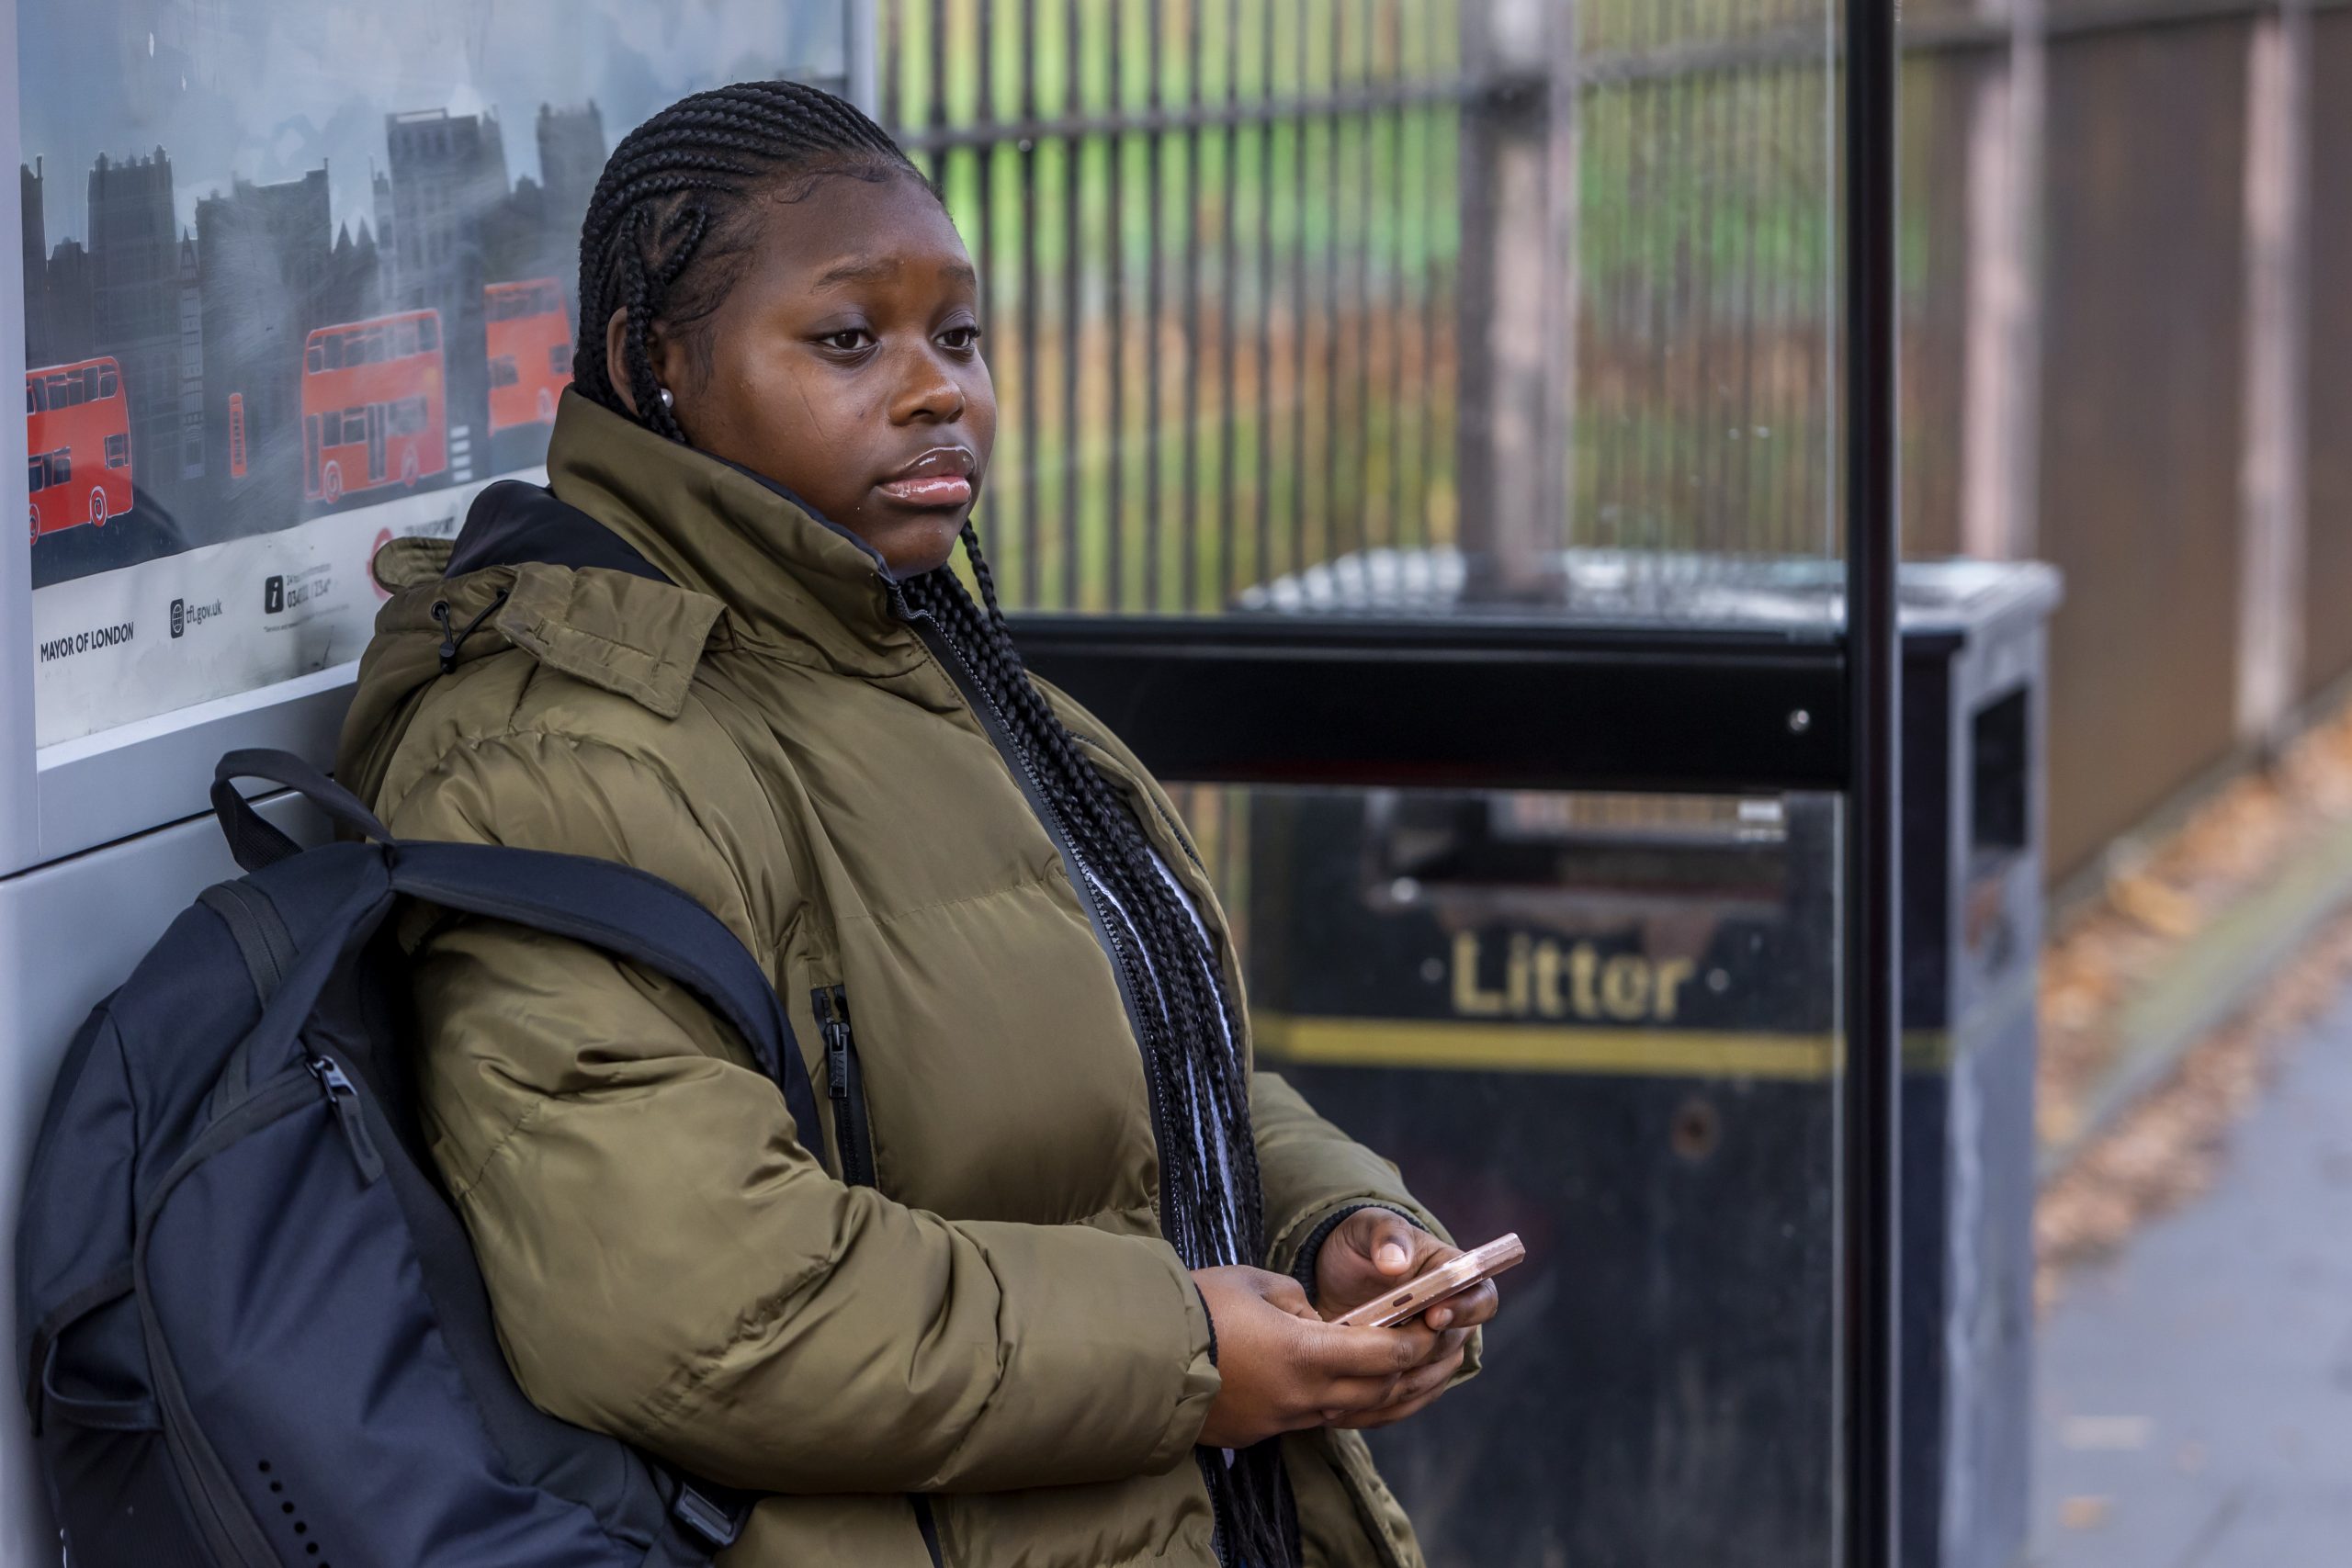 A young person is sitting at a bus stop thinking about their rights to medical treatment